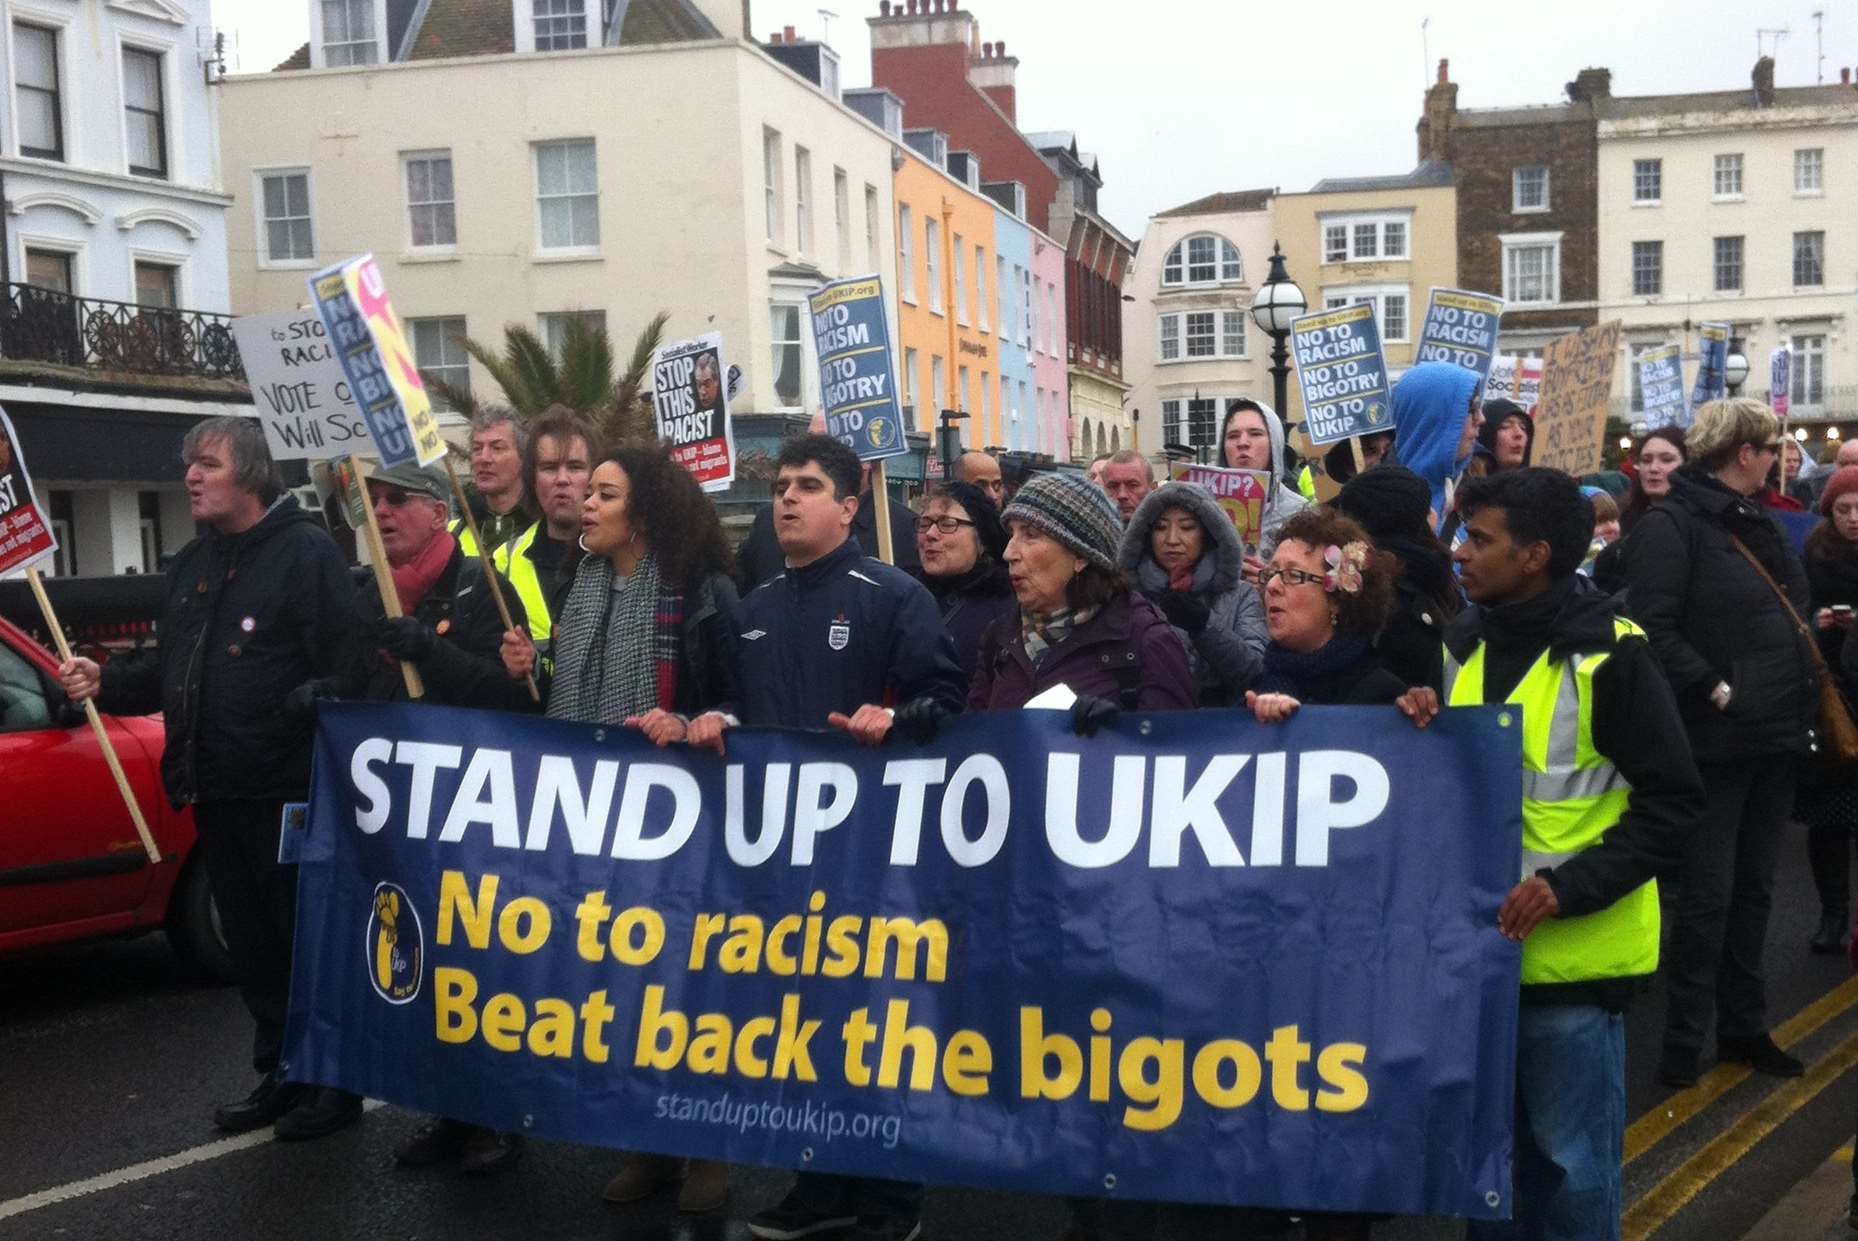 The head of the march as it works its way through Margate to the Winter Gardens